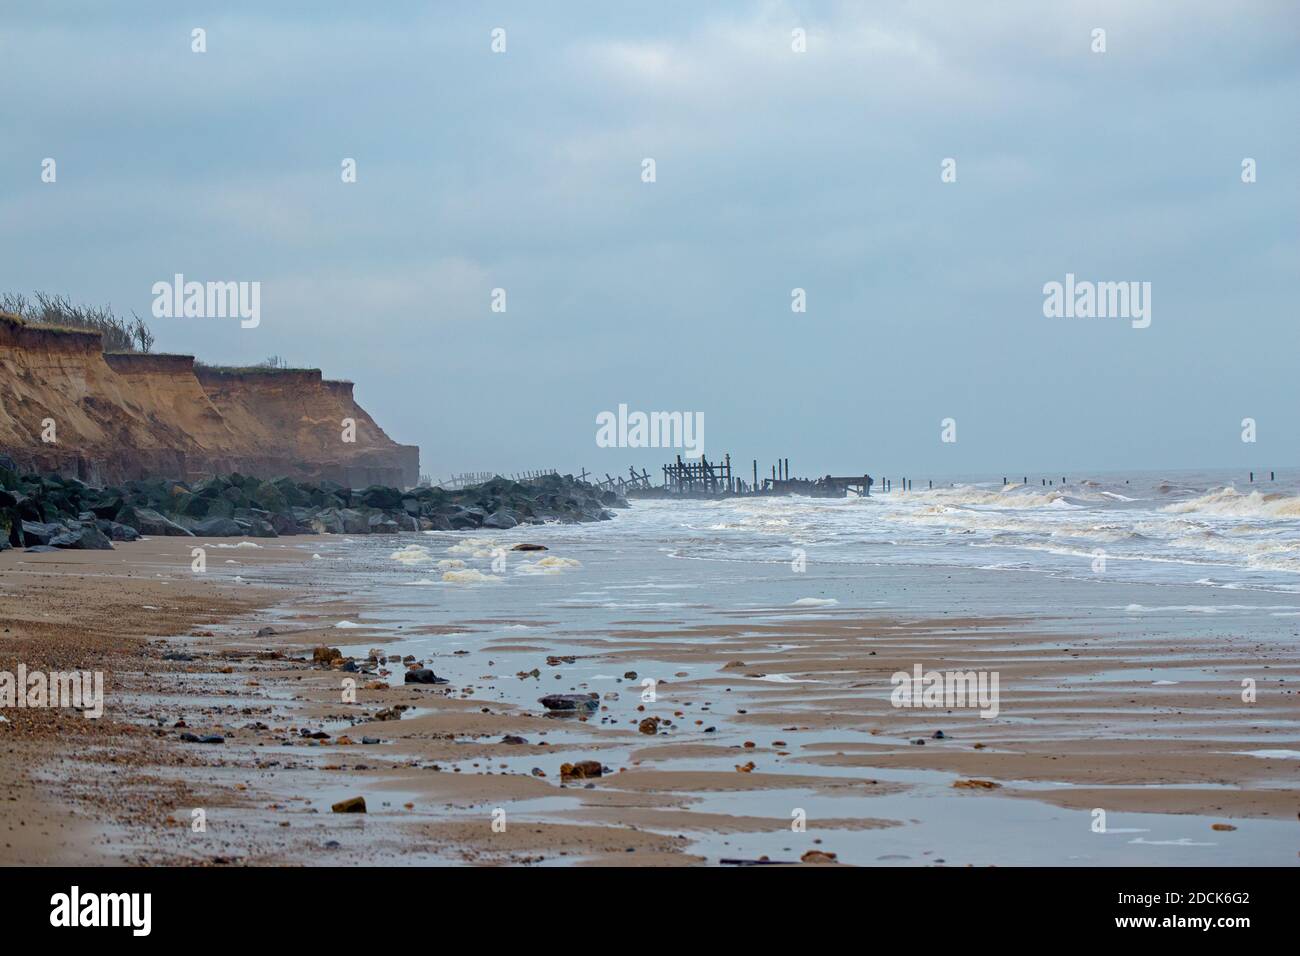 Happisburgh beach, Norfolk. Coastal cliff erosion by the North Sea. Destroyed brick built house material on the beach. Sea defences of imported Norway Stock Photo